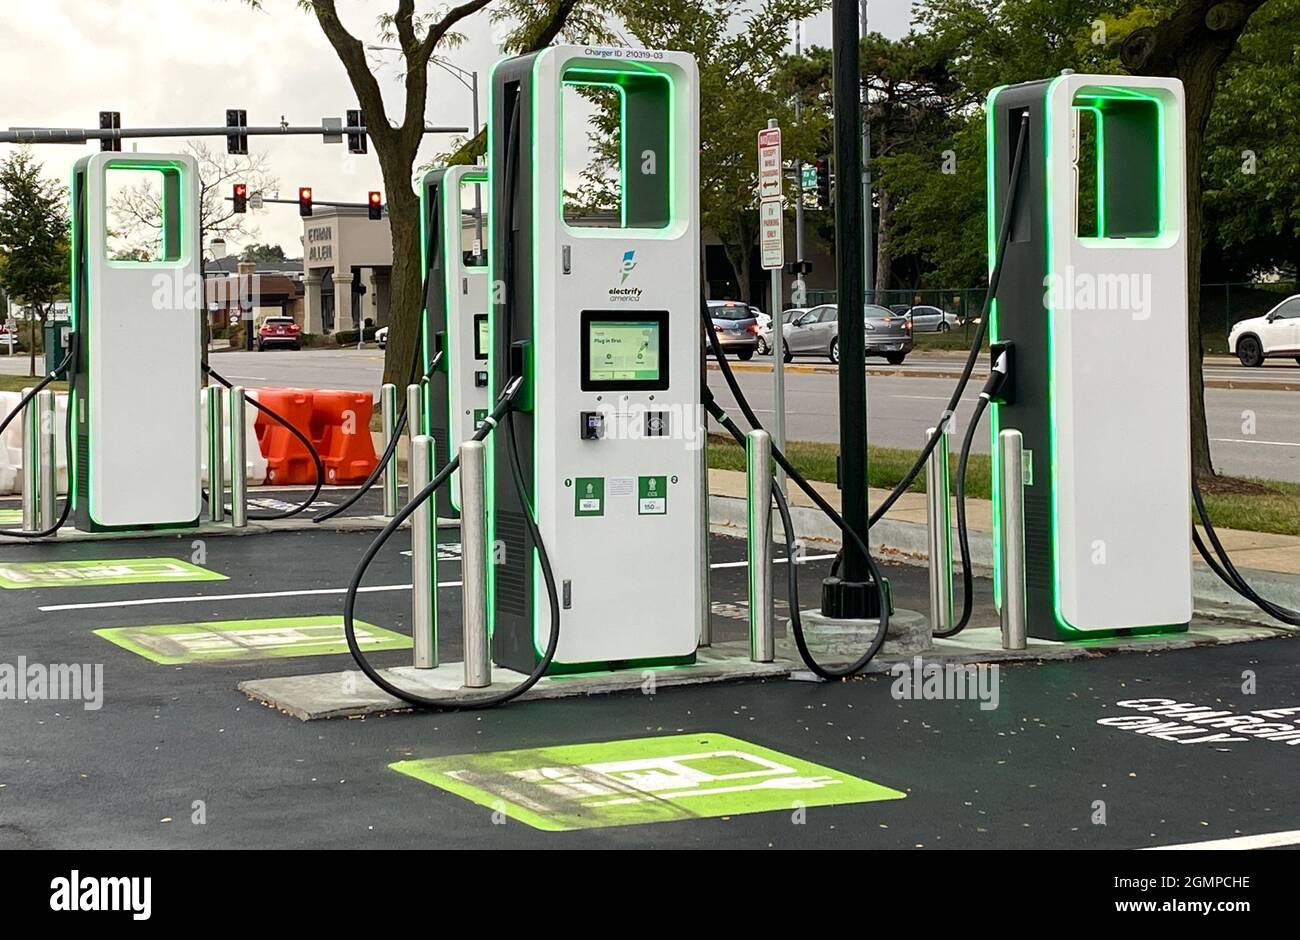 Westfield Old Orchard, 4905 Old Orchard Center, Skokie, IL, Electric  Charging Station - MapQuest